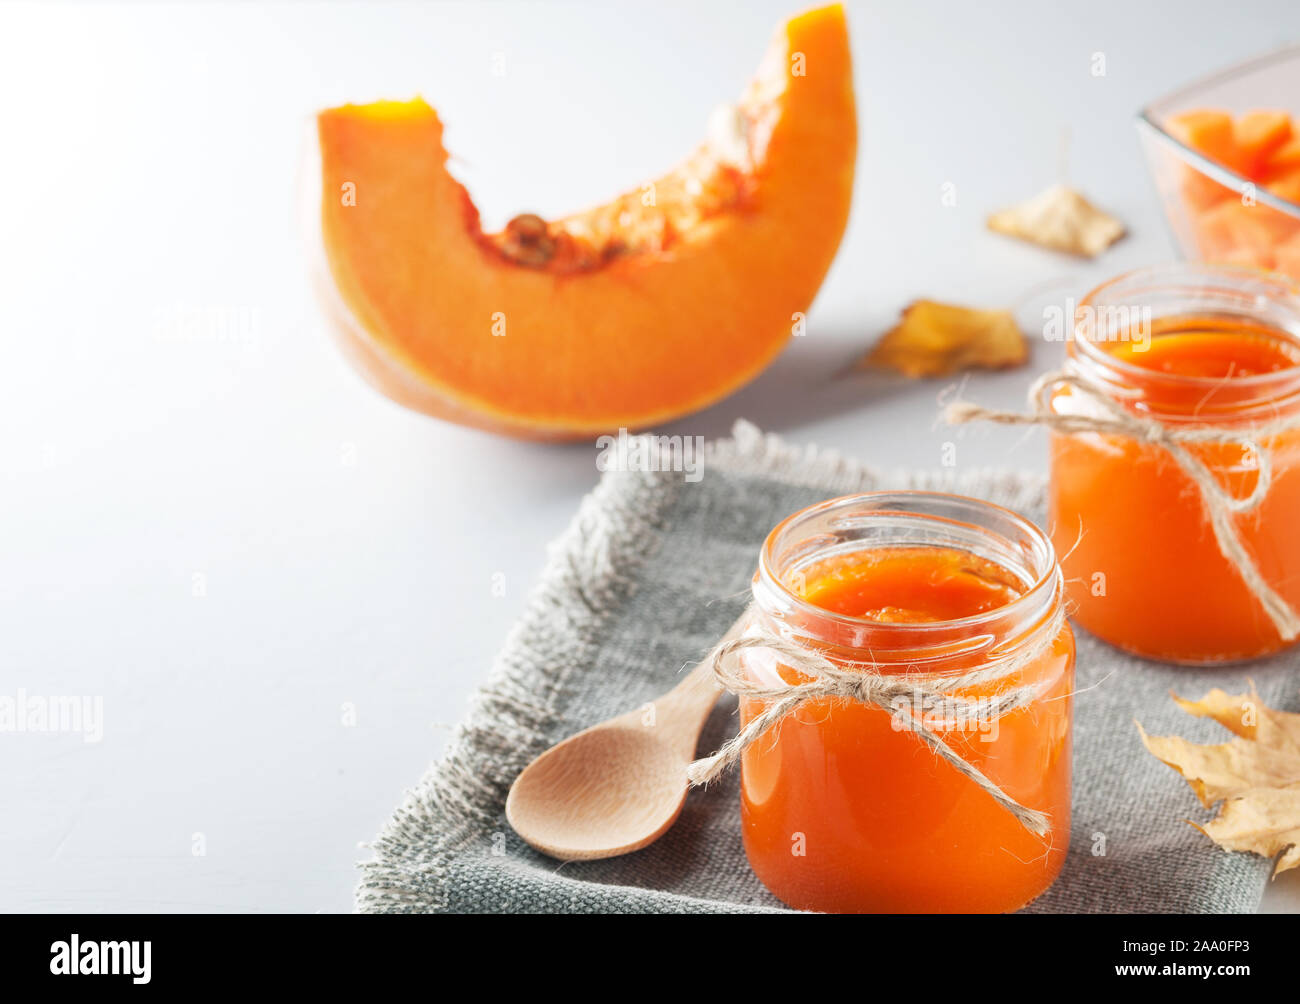 Homemade orange  pumpkin jam in a serving jars on the table. Sweet, yummy ,tasty dessert. Autumn dishes. Image with copy space,vertical orientation. Stock Photo